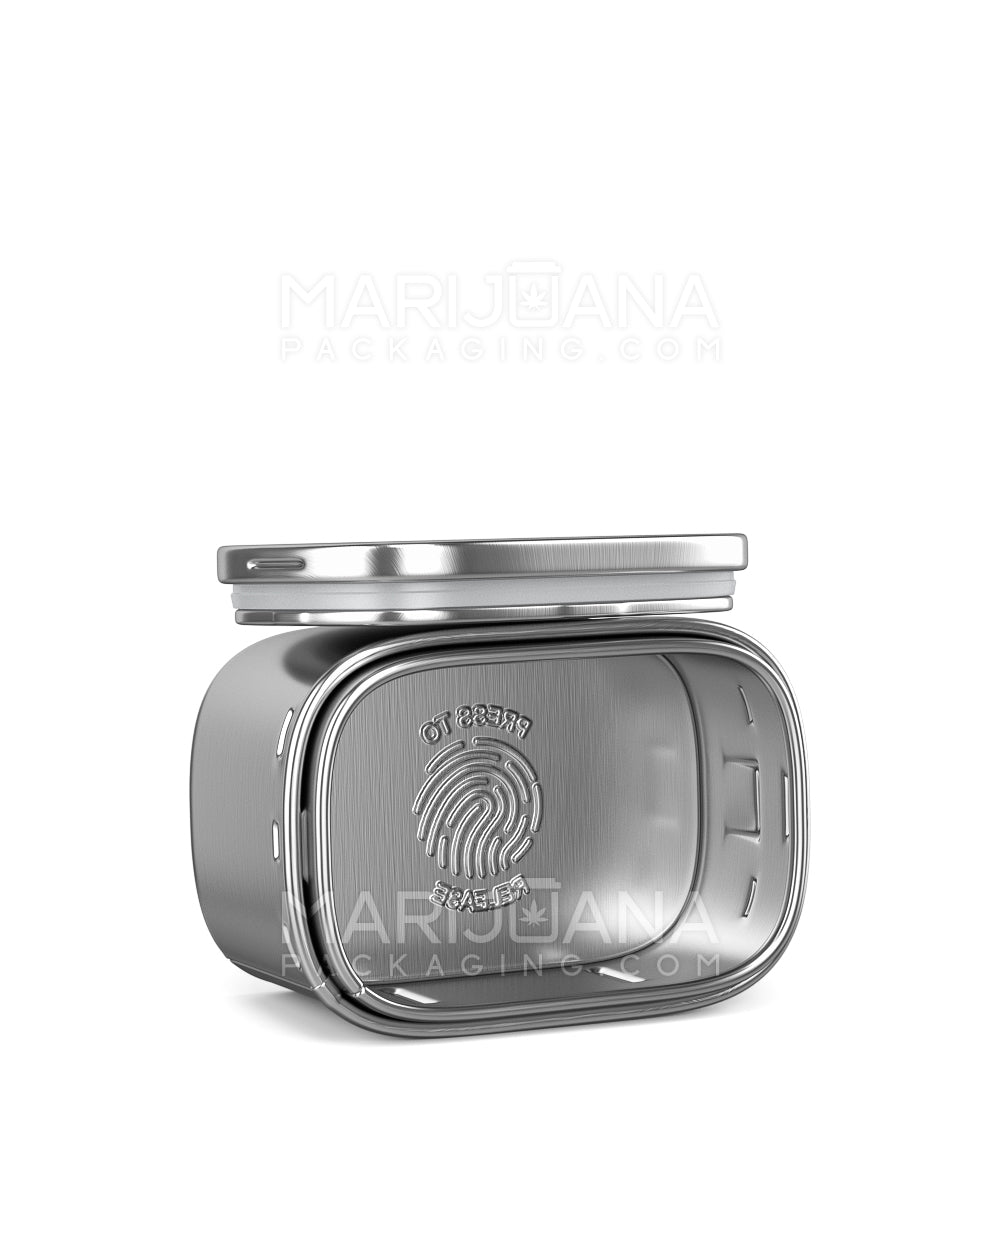 Child Resistant & Sustainable | 100% Recyclable PushTin Small Container | 1oz - Silver Tin - 250 Count - 7